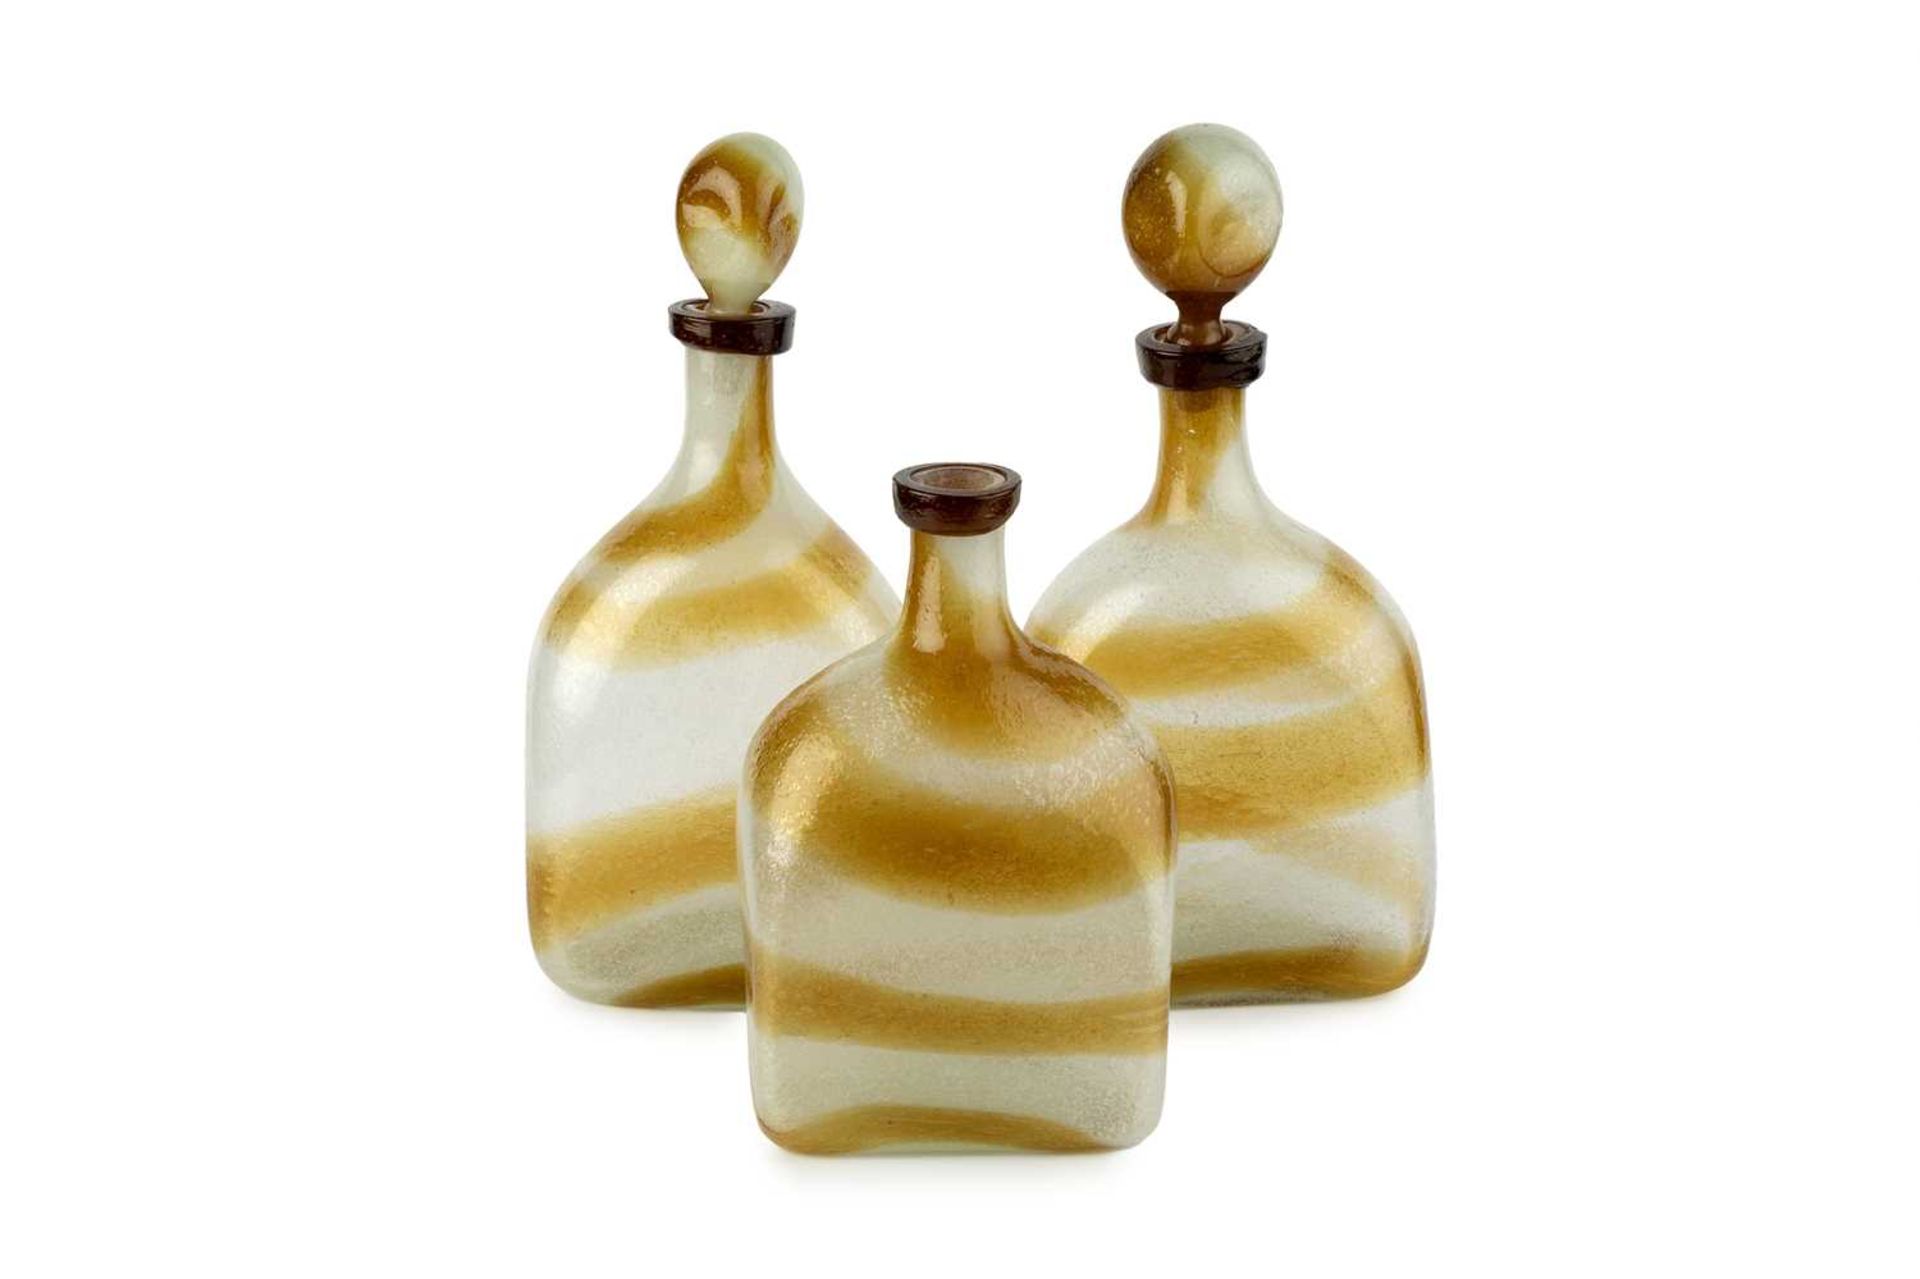 Attributed to Arte Vetraria Muranese (AVEM) Three Pulegoso glass bottles, circa 1950 clear and brown